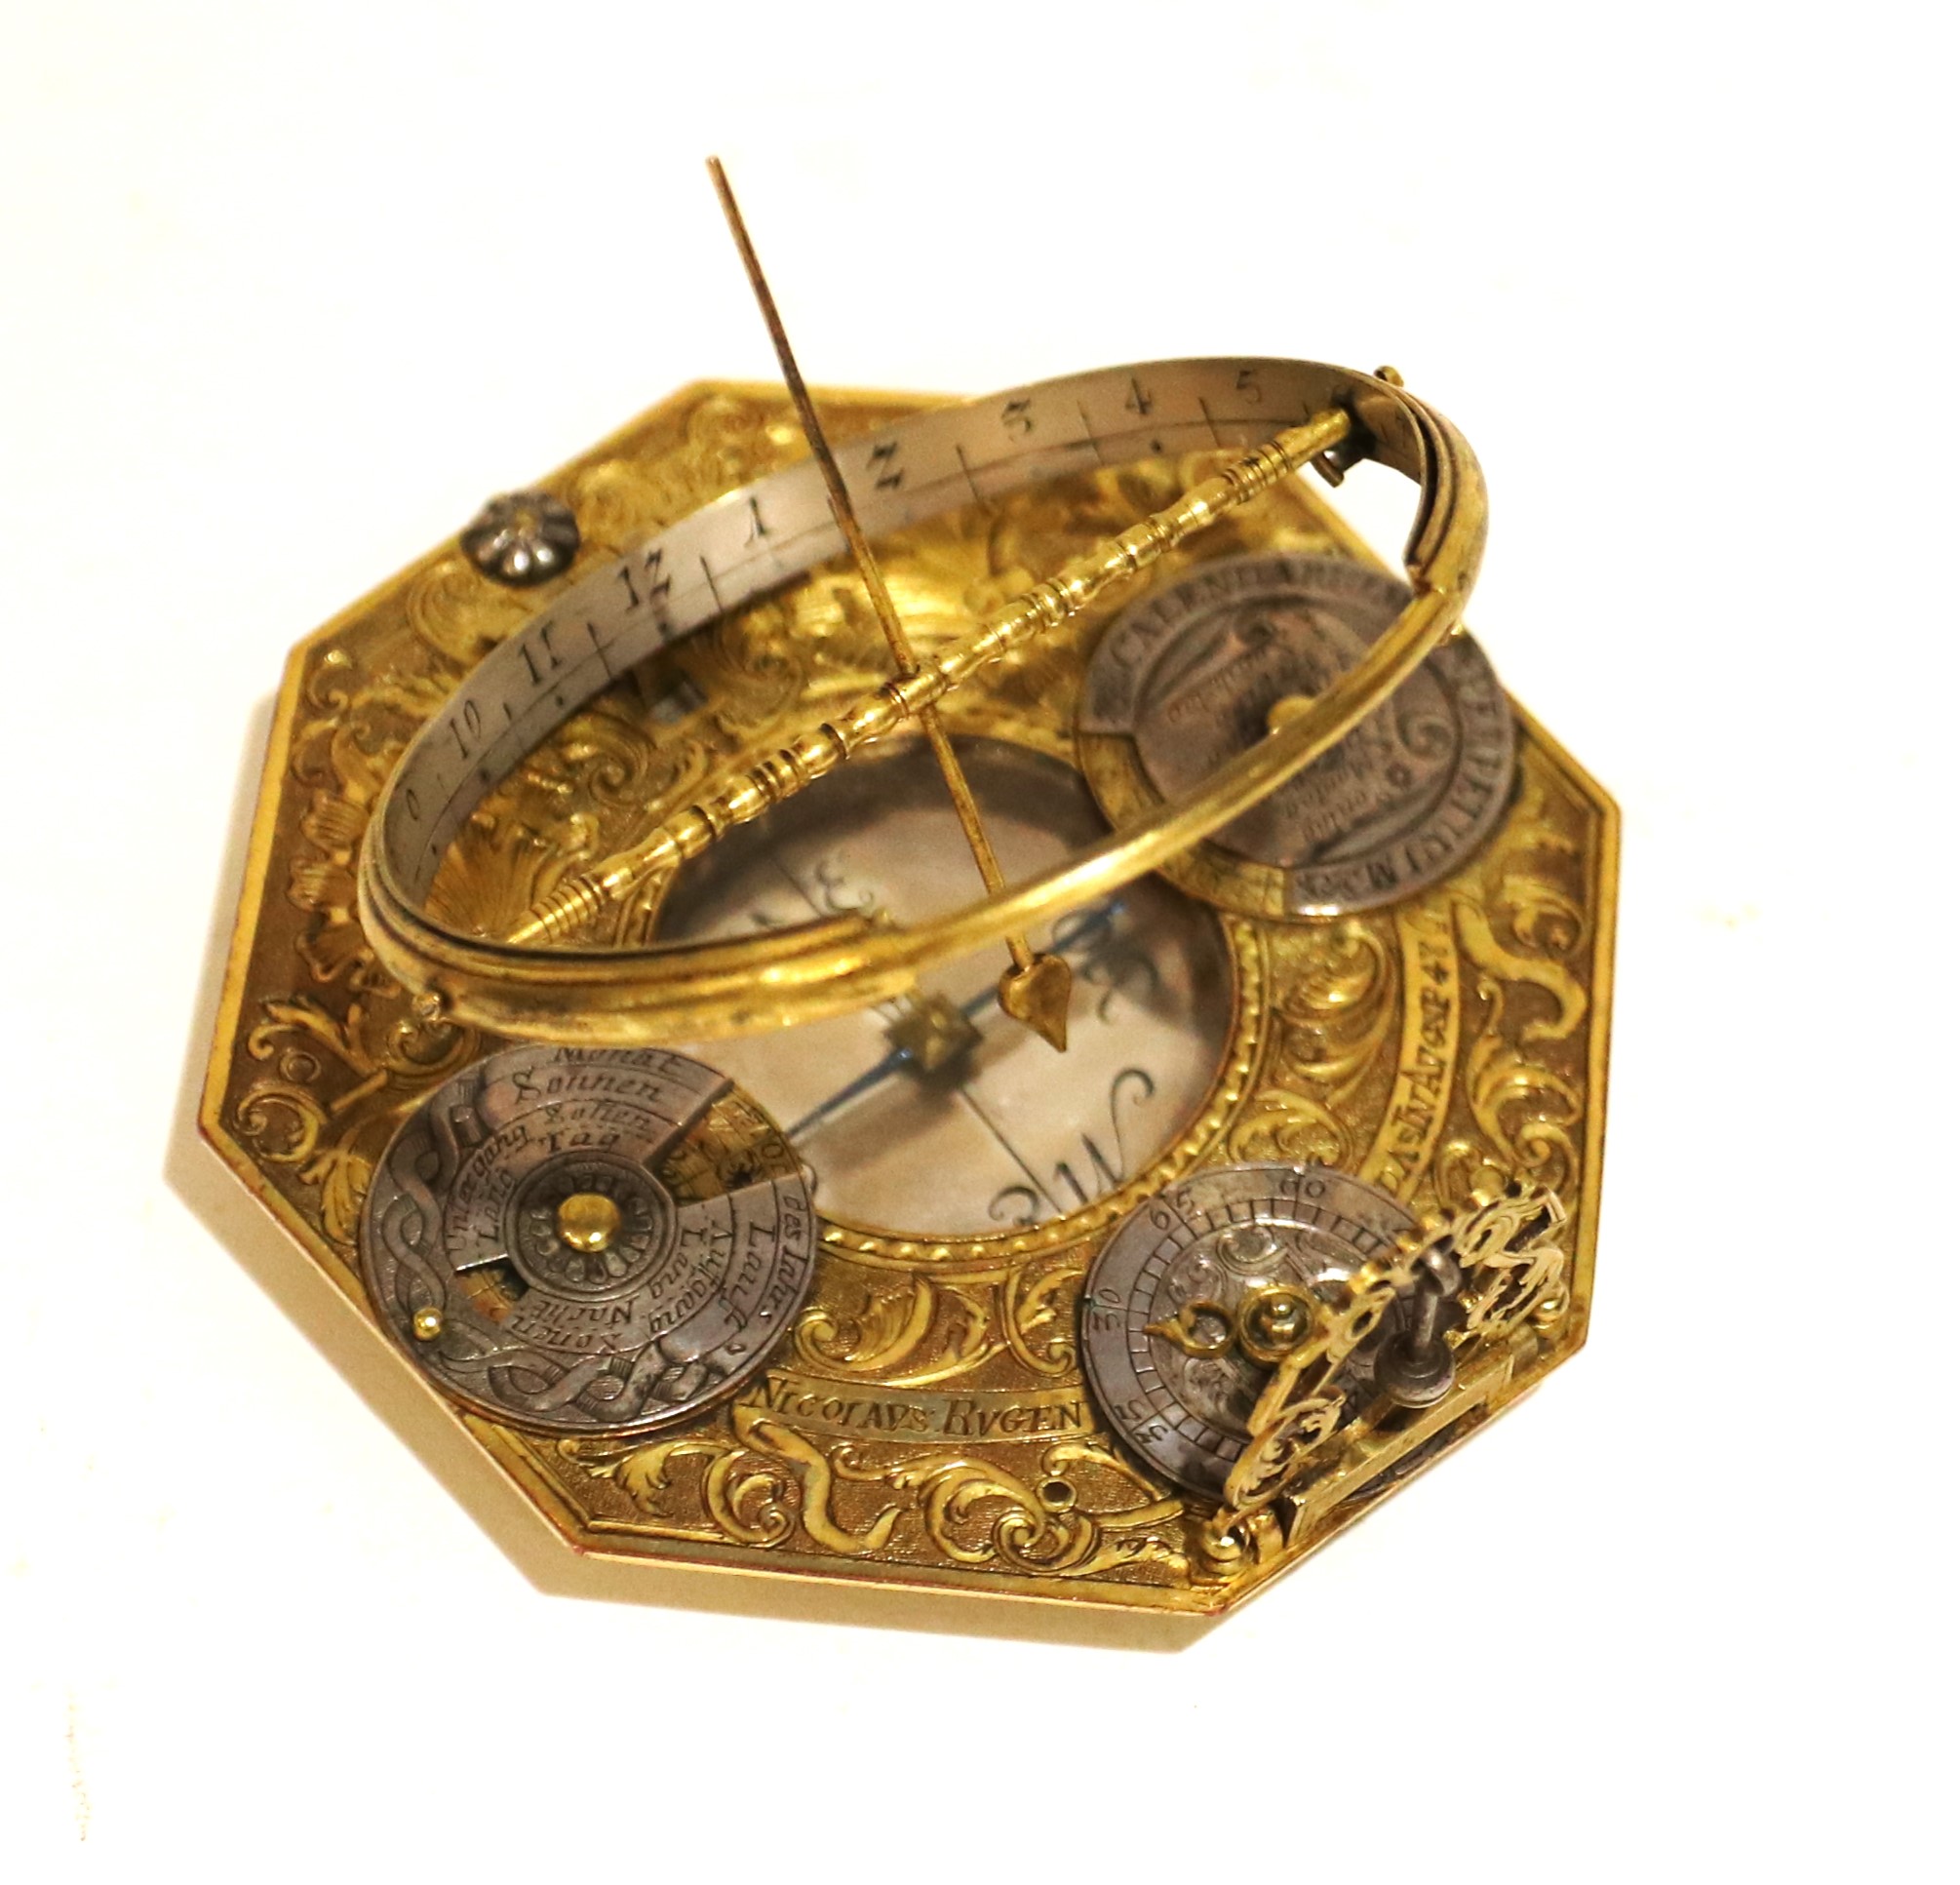 Silver and gilded brass mechanical sundial by Rugendas with two perpetual calendars, late 17th century